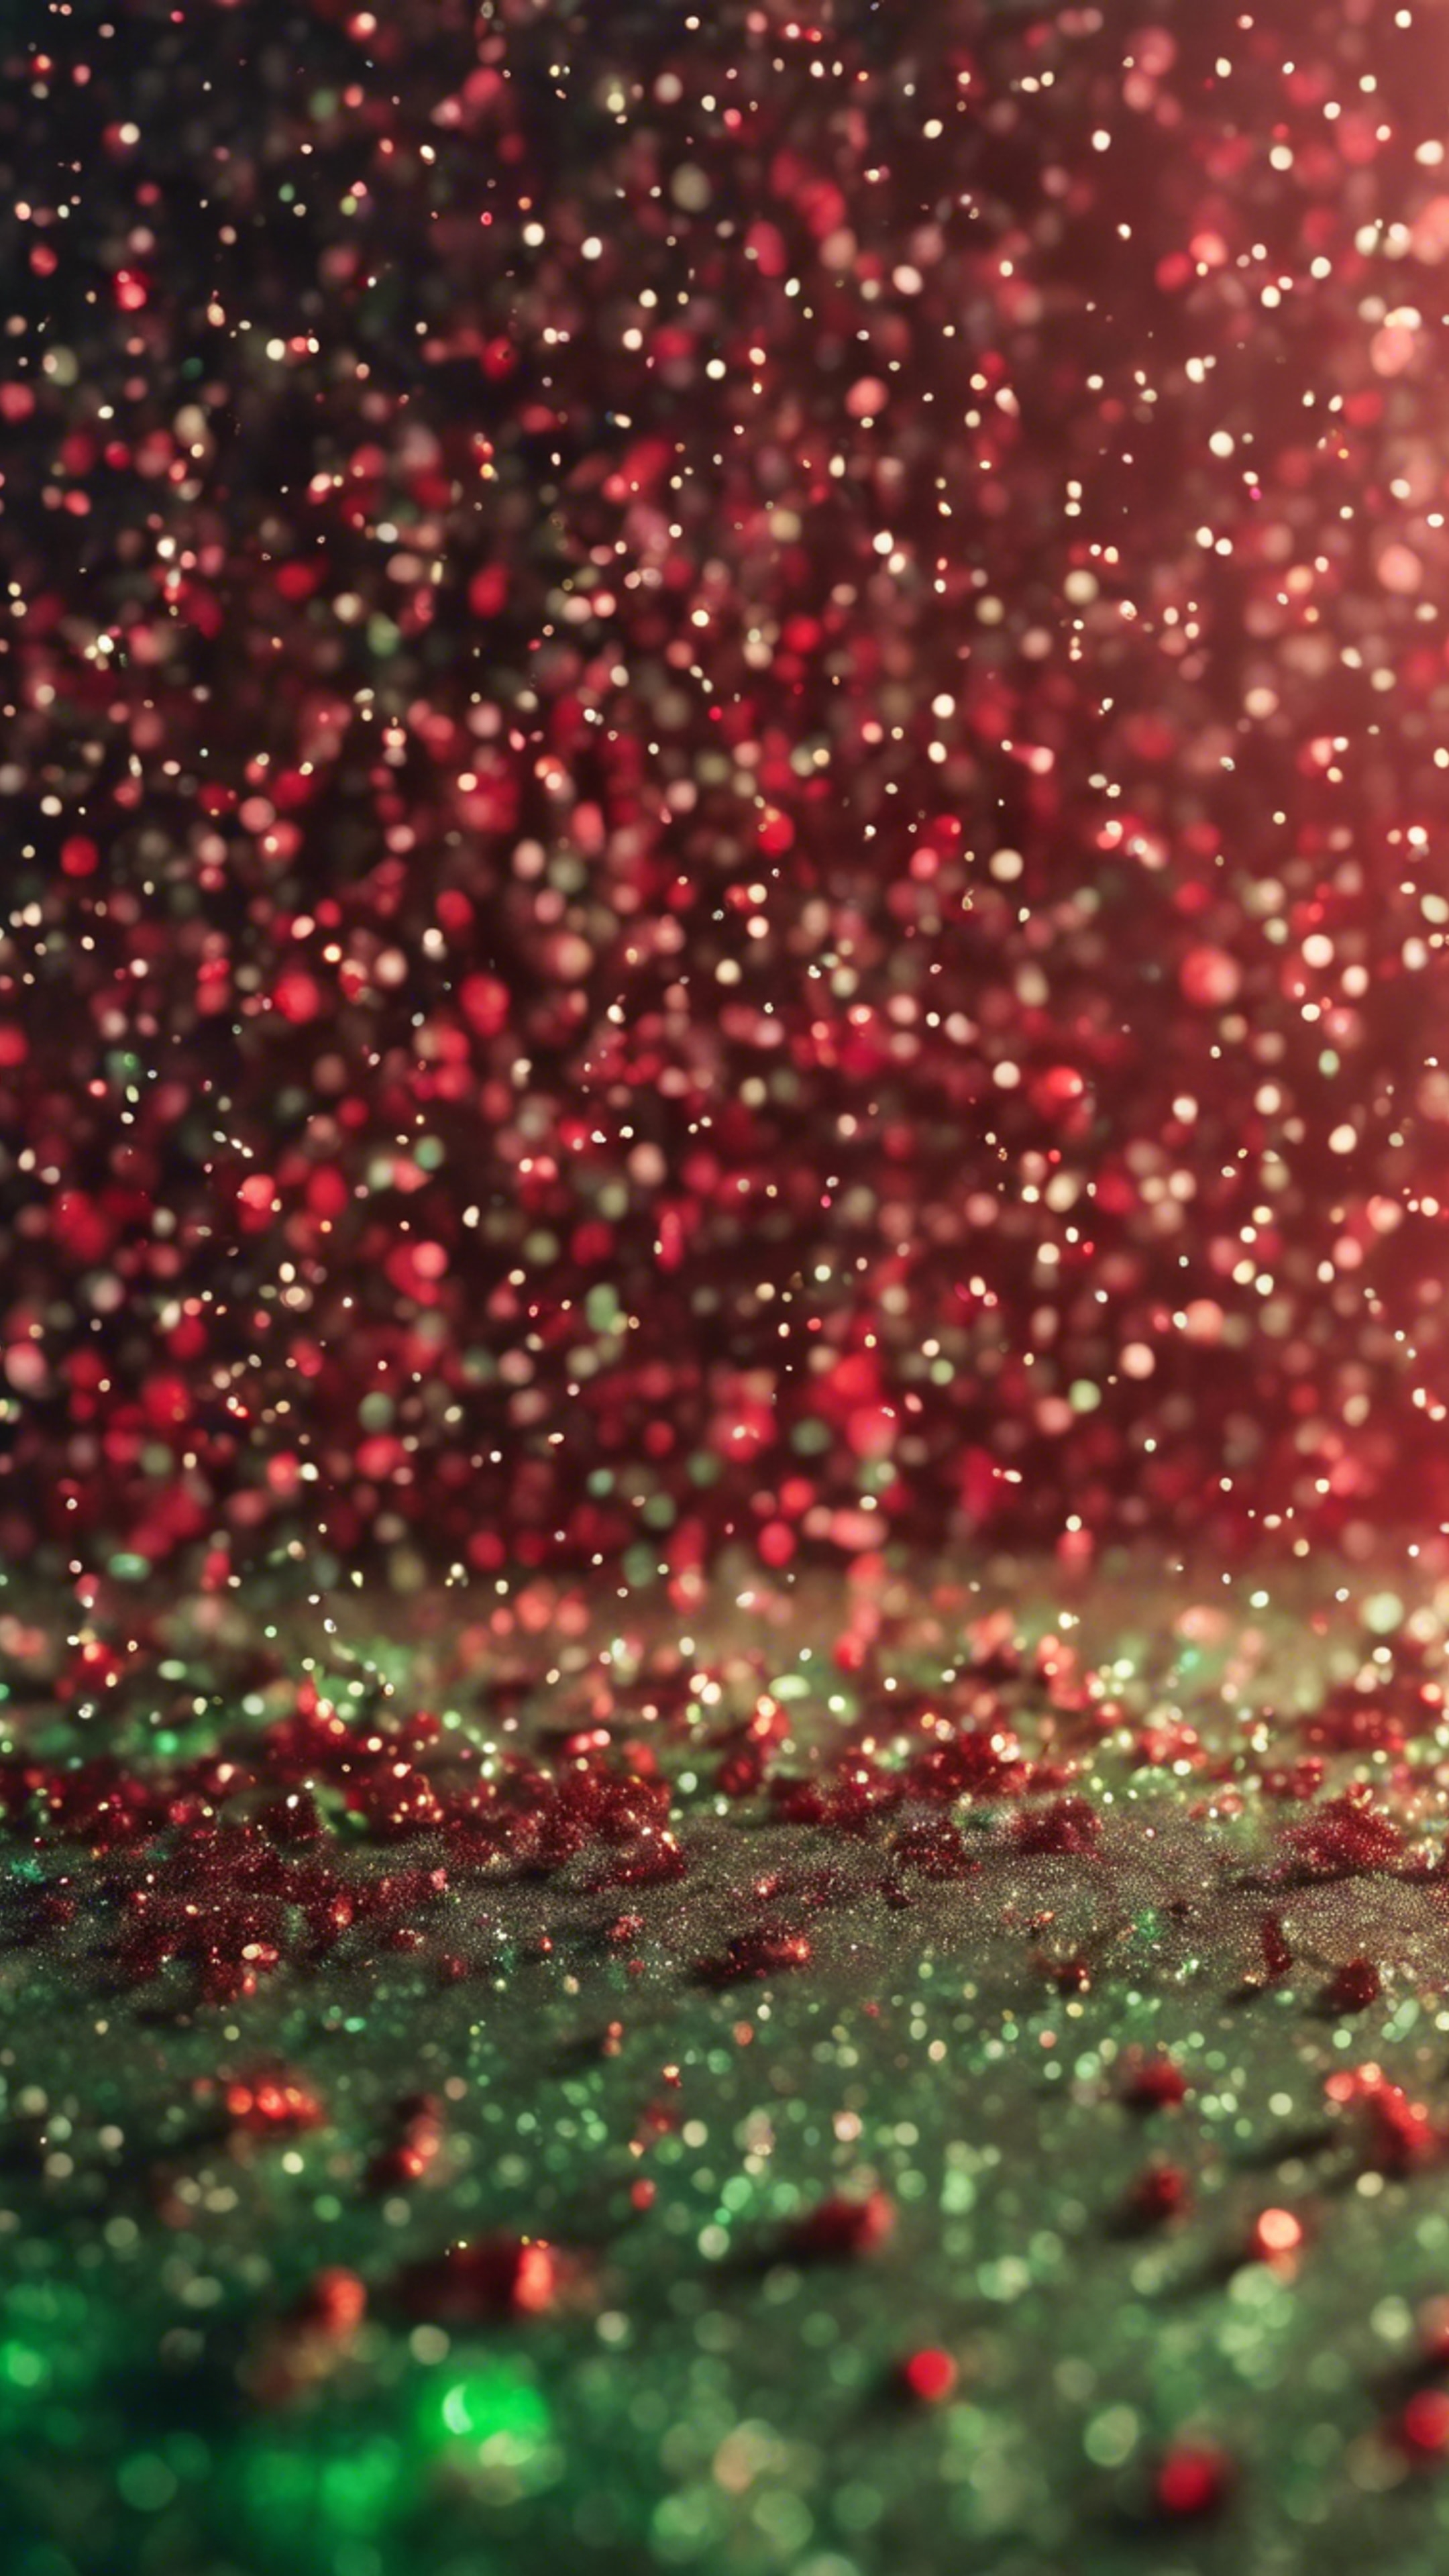 Tiny green and red glitter particles scattered randomly 벽지[e9e8f5a2023d489ba4c1]